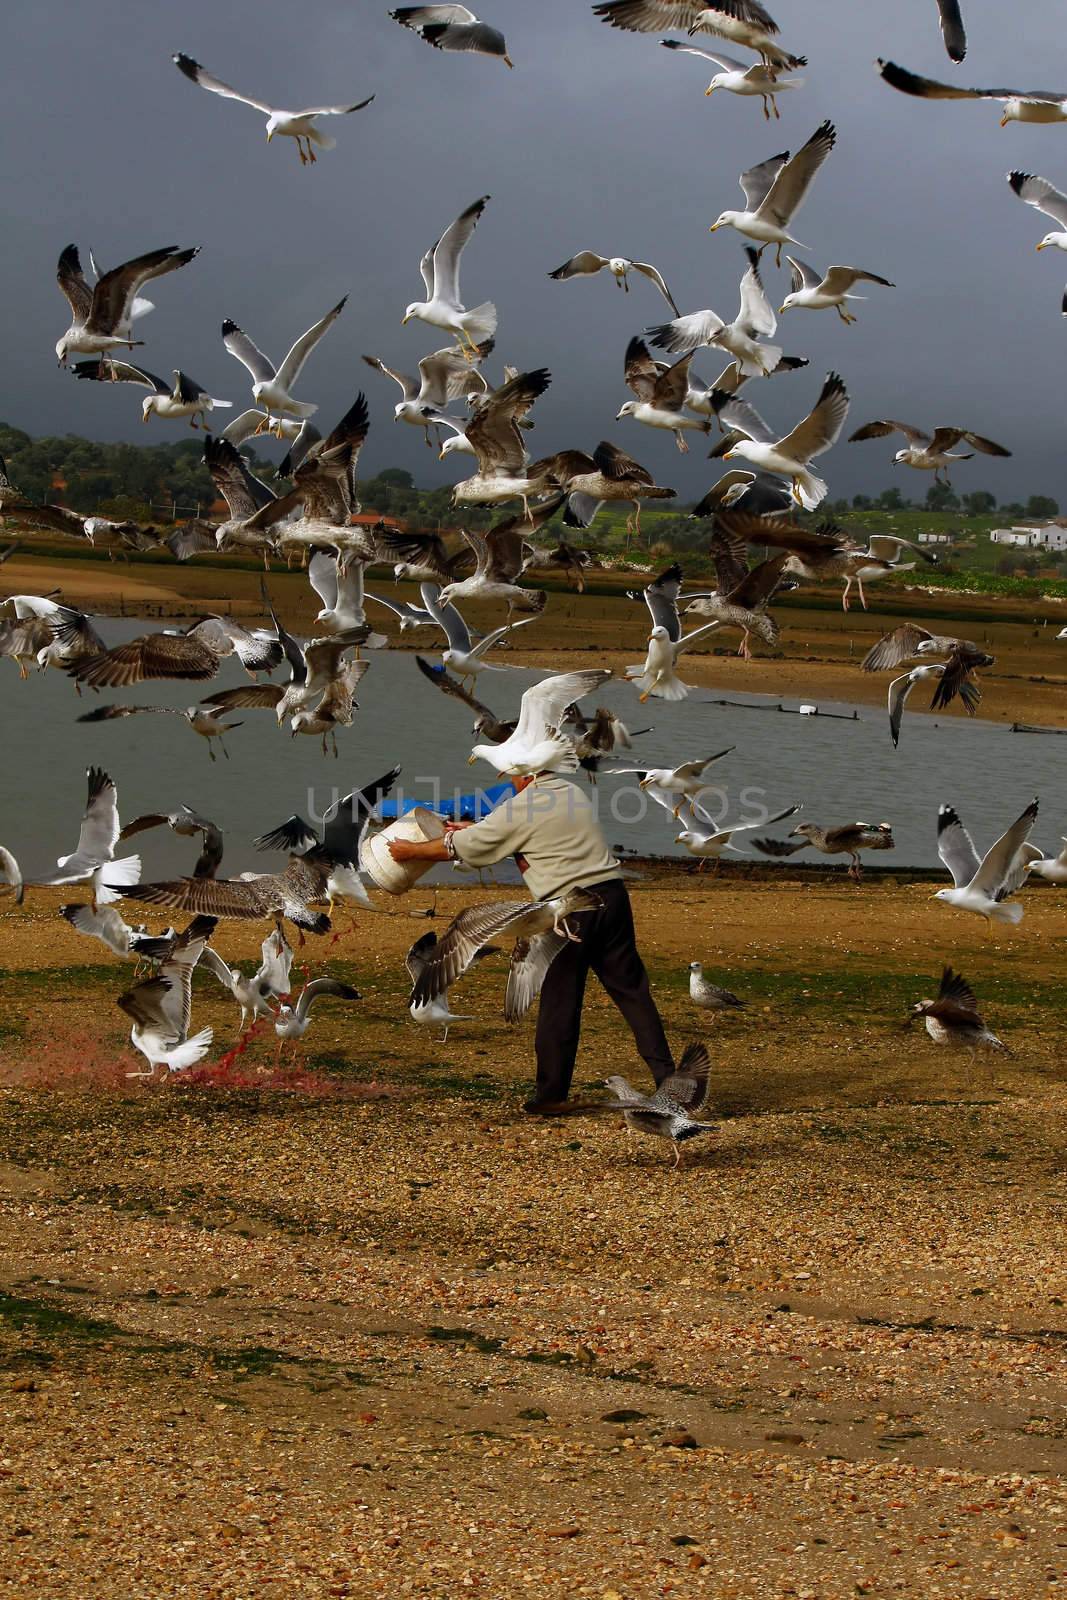 Man throws some fish leftovers on the ground and group of seagulls takes advantage of the situation.